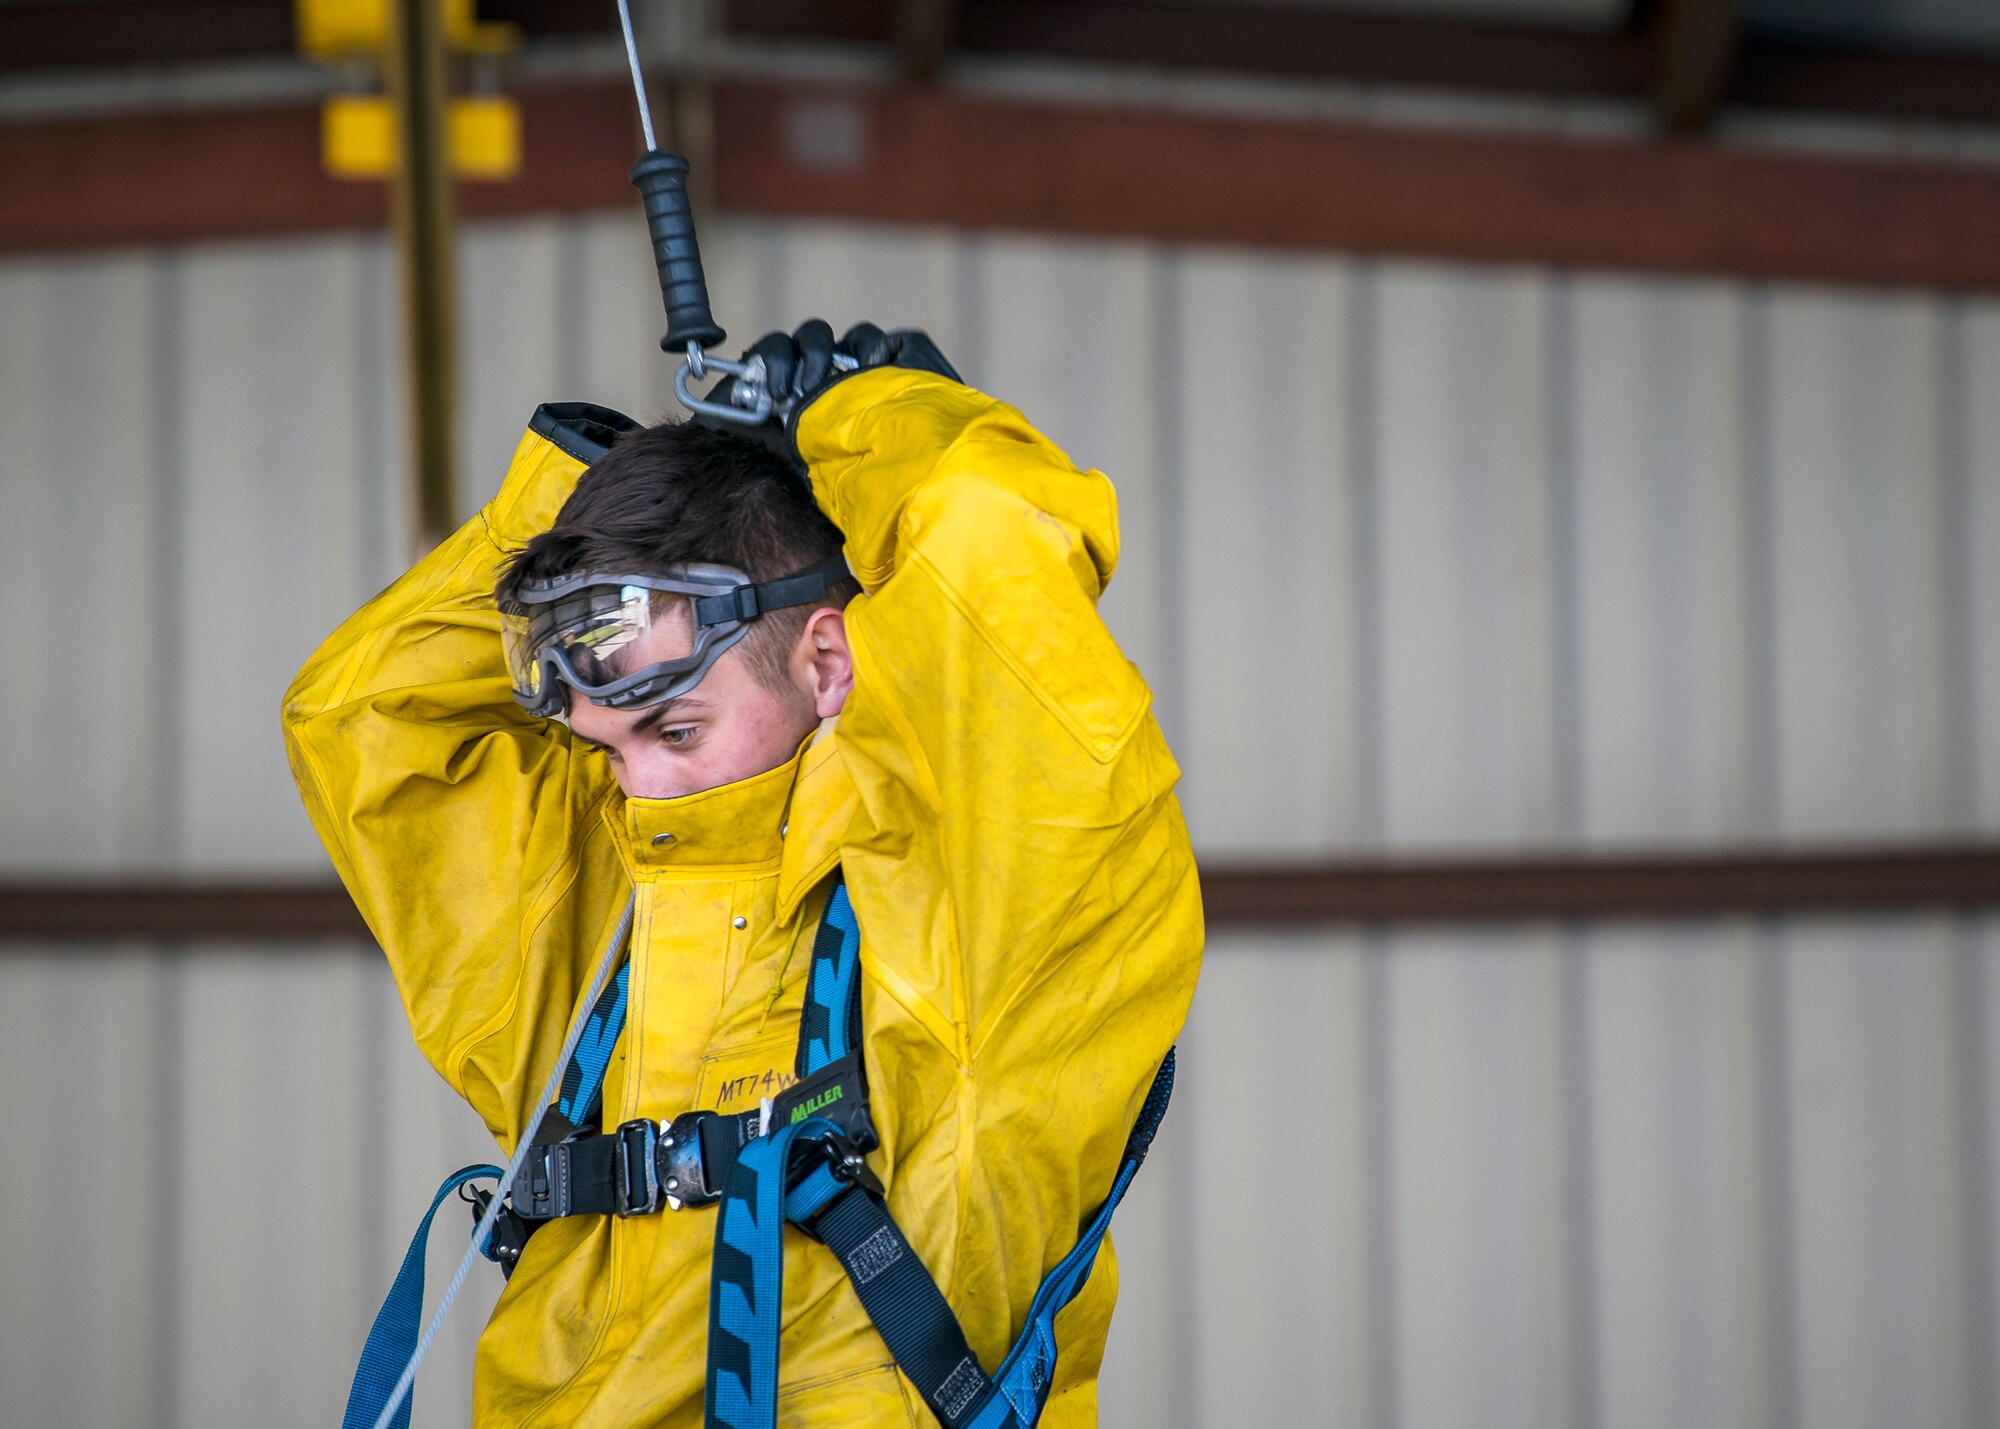 Airman 1st Class Benjamin Jones, 74th Aircraft Maintenance Unit (AMU) crew chief, attaches a hook to a harness, Feb. 25, 2019, at Moody Air Force Base, Ga. On top of their daily scheduled maintenance a team of six Airmen dedicated over 10 hours washing an A-10C Thunderbolt II to ensure the aircraft was free of any surface or structural deficiencies that could present a safety hazard during flight. (U.S. Air Force photo by Airman 1st Class Eugene Oliver)